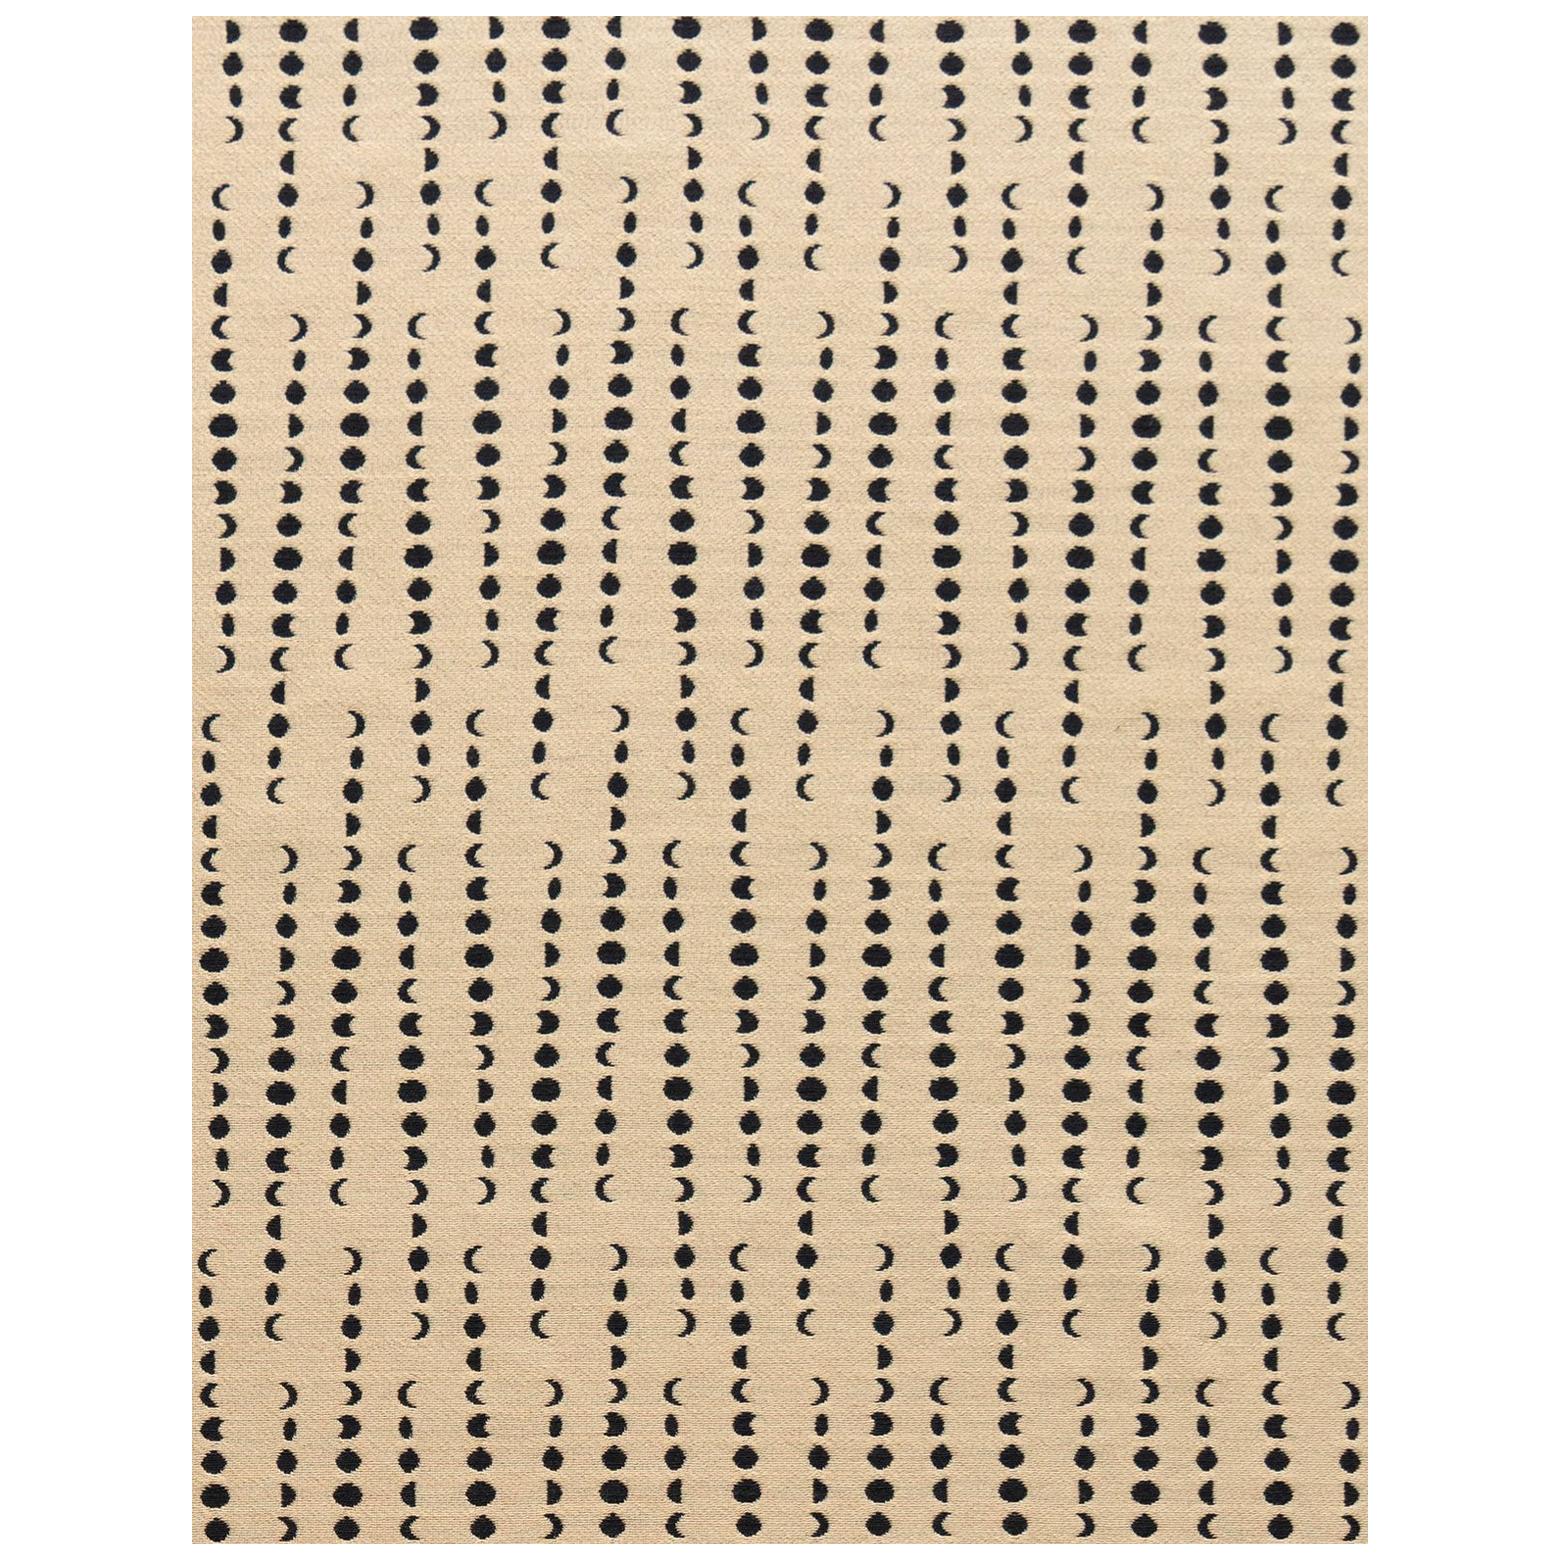 Earthlight Moon Woven Commercial Grade Fabric in Leo, Beige and Black